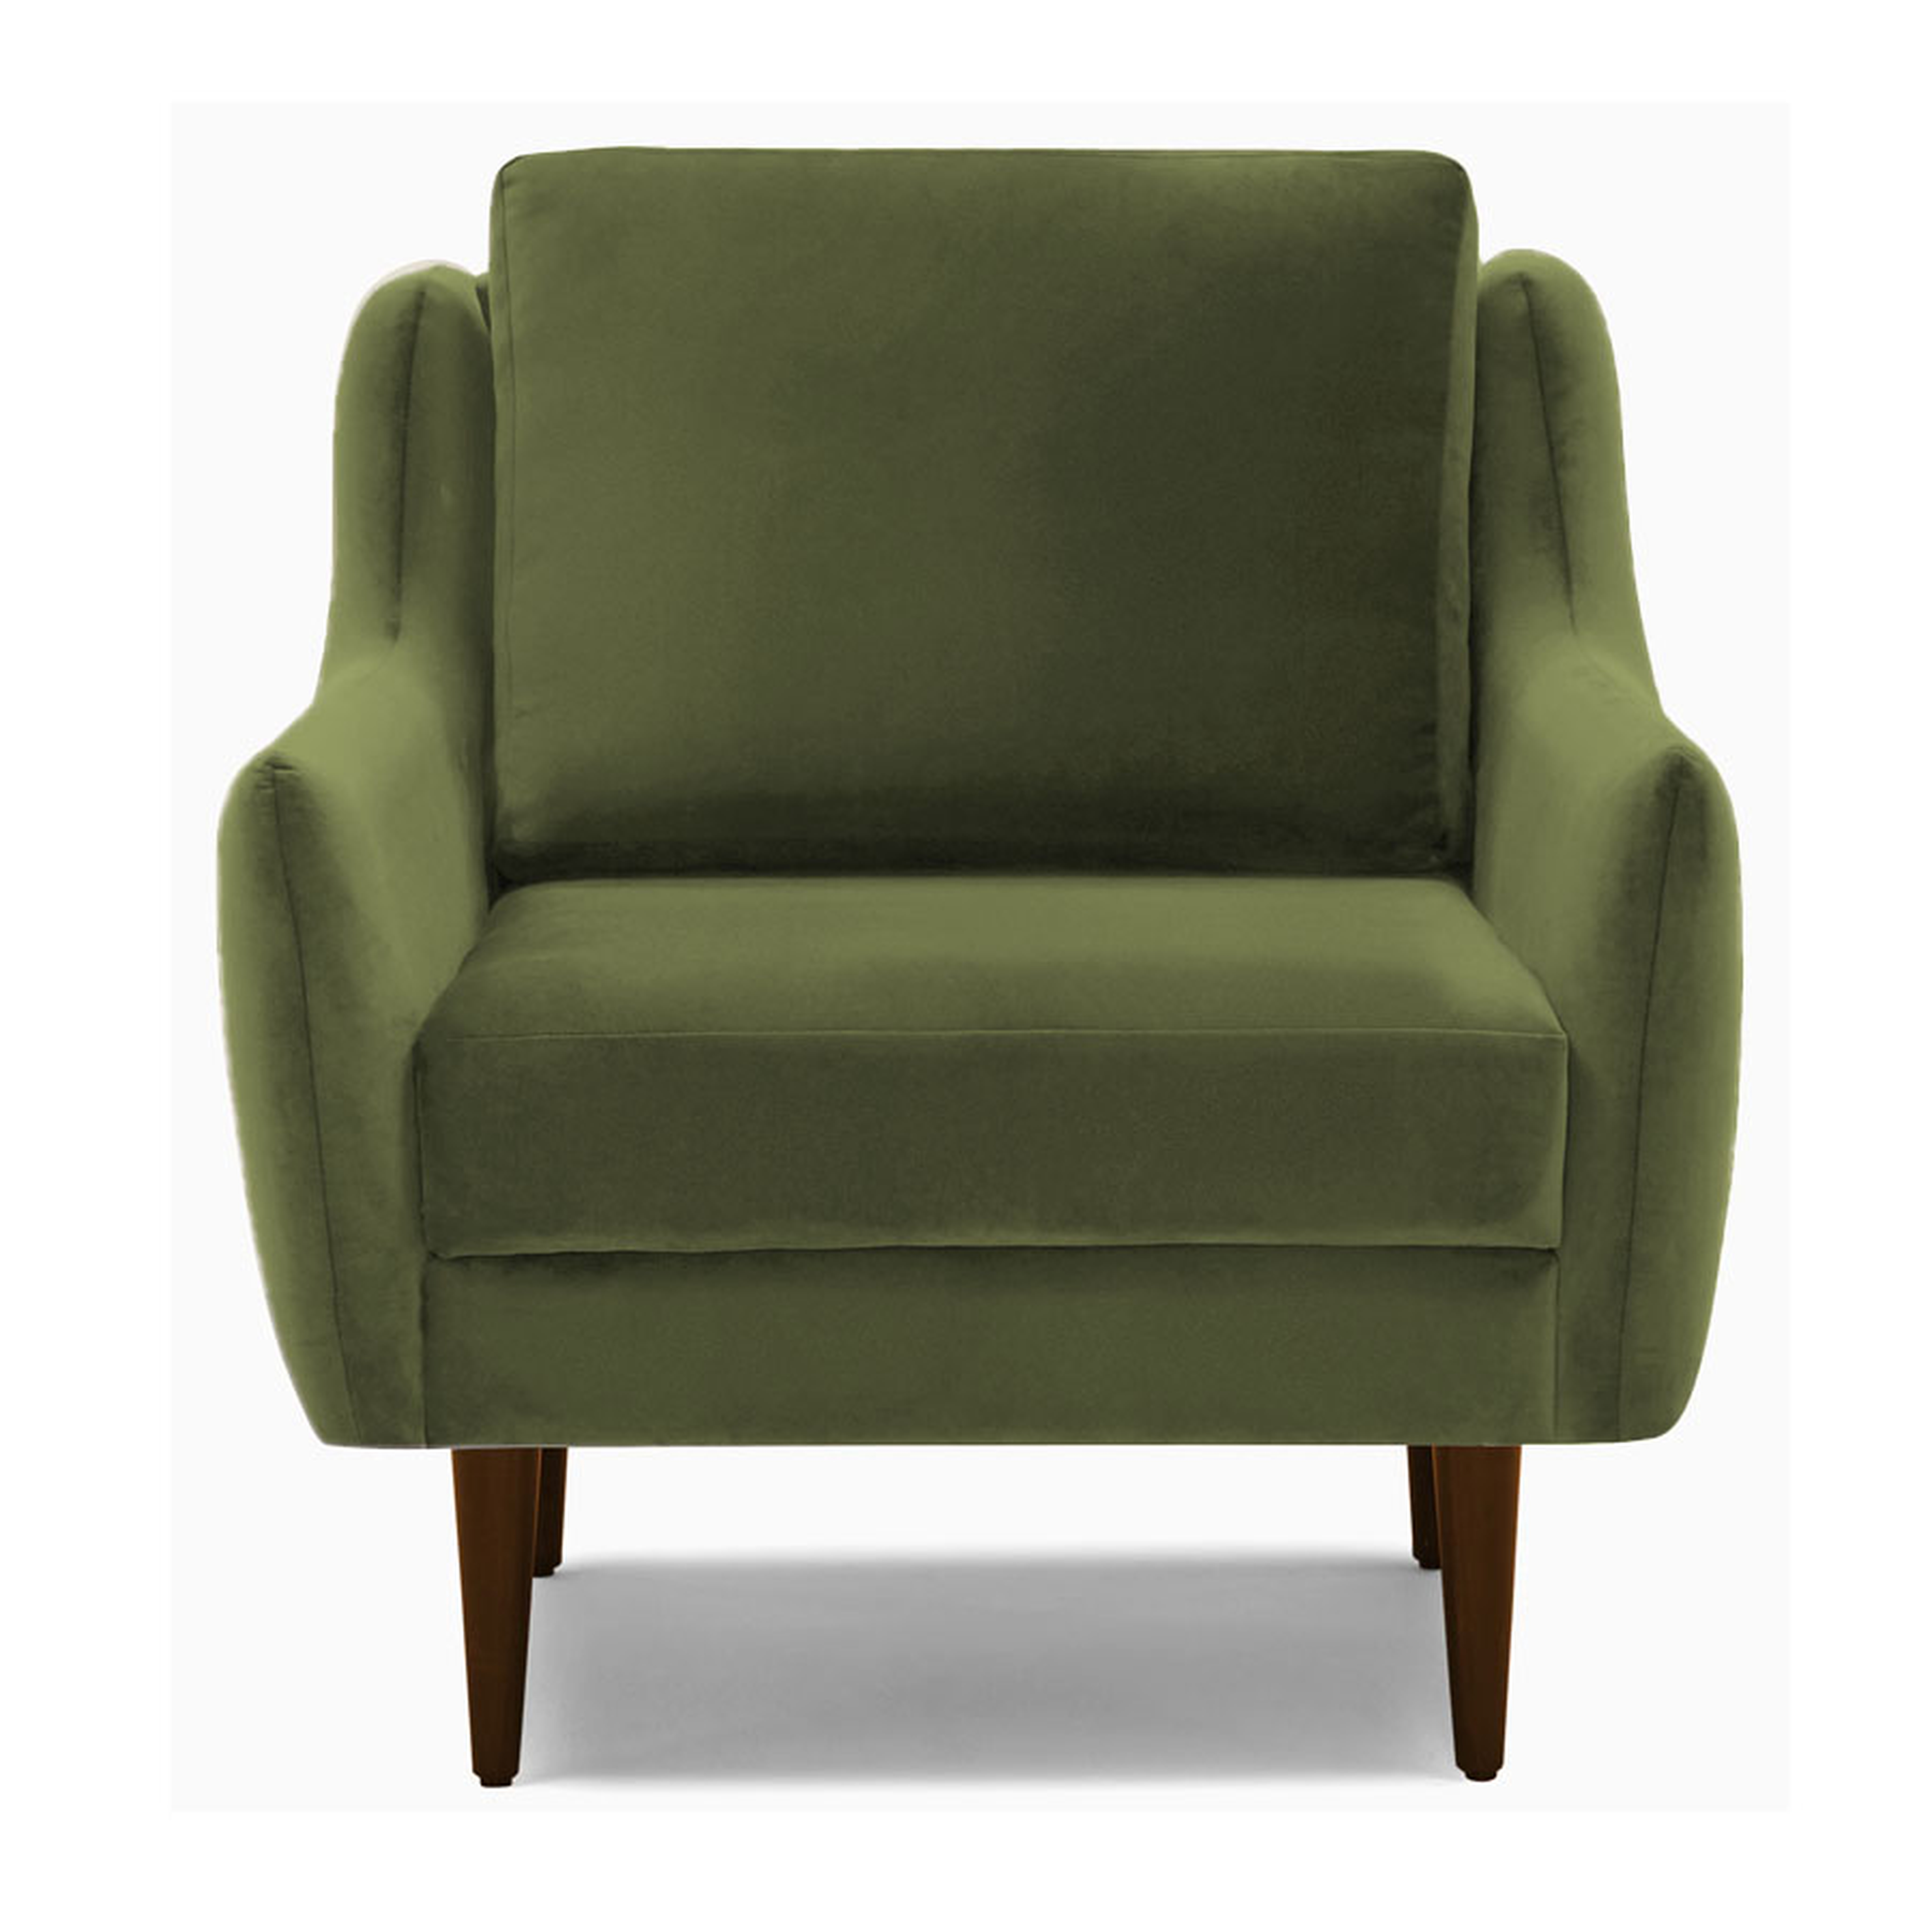 Bell Chair in Faithful Olive - Article